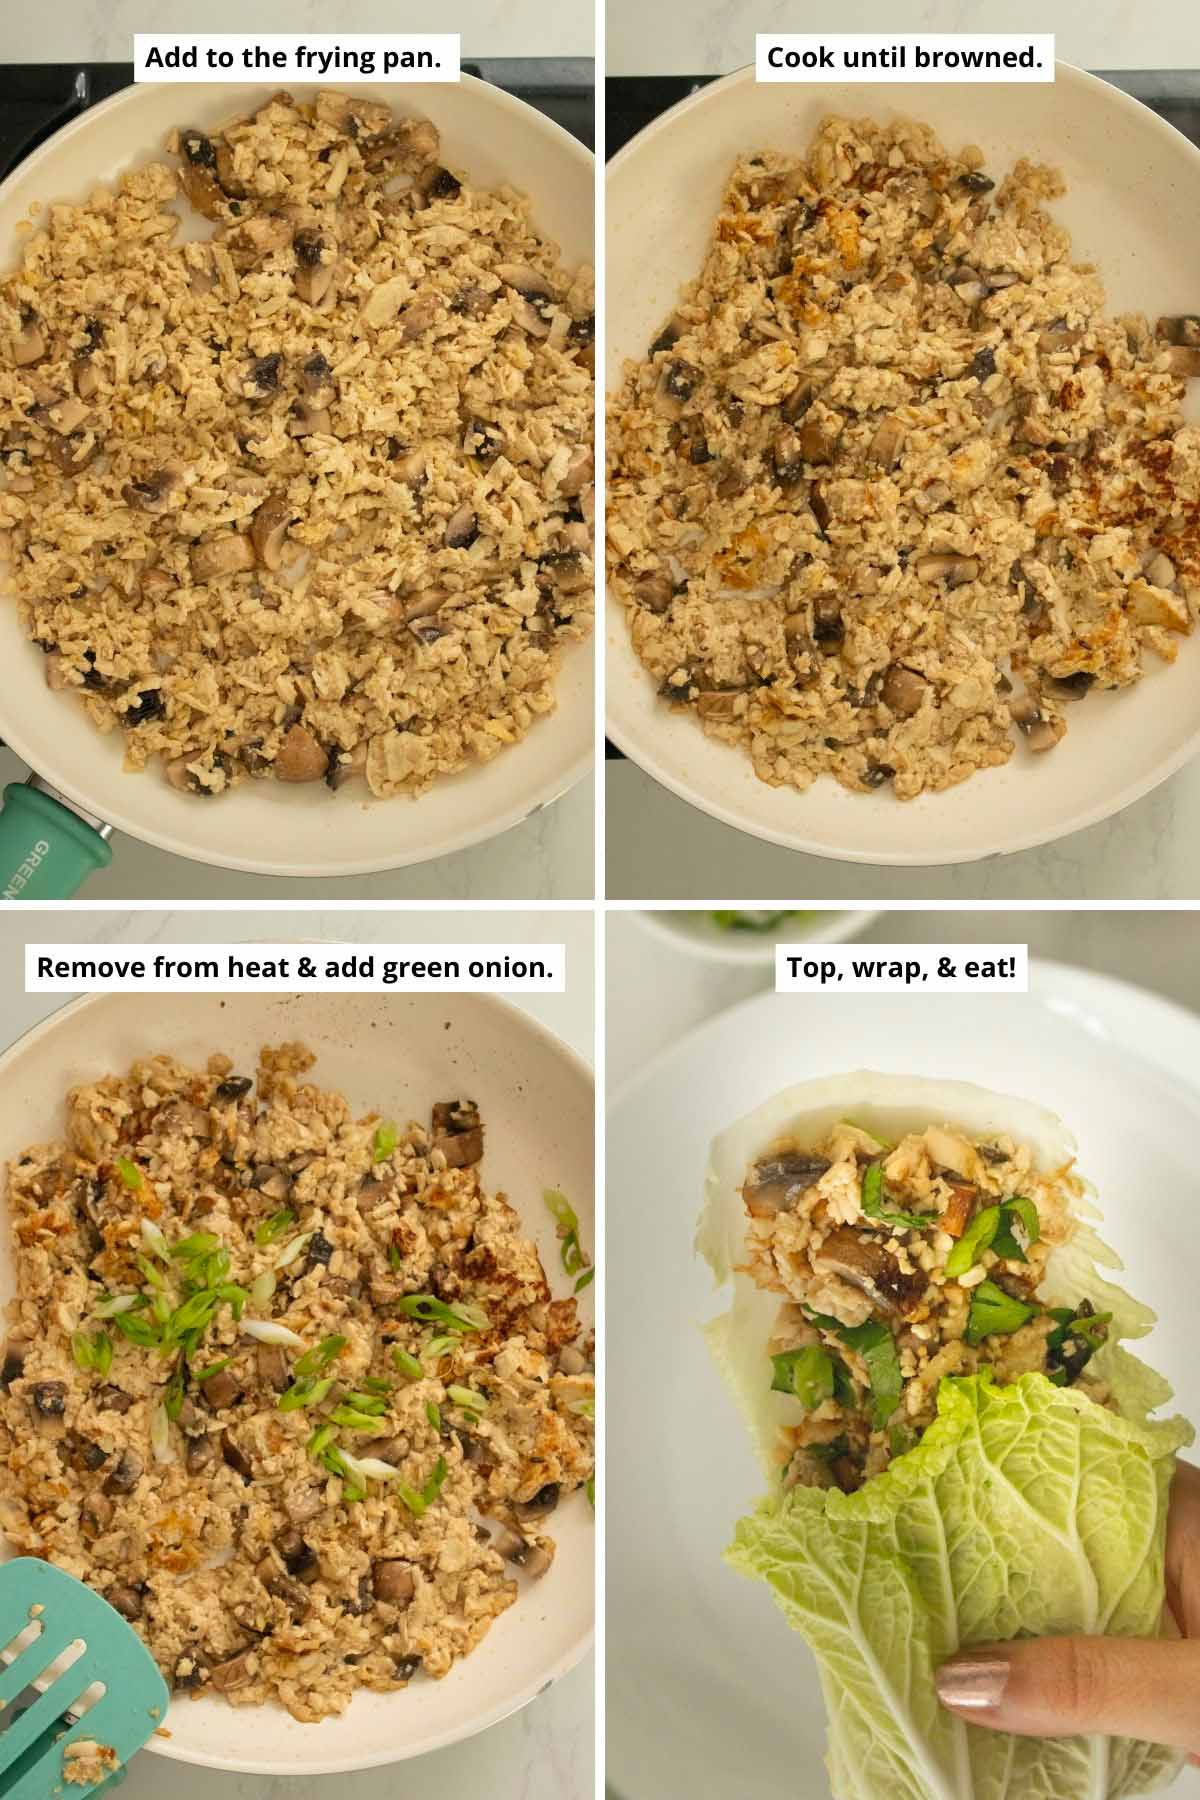 image collage showing the filling in the pan before and after cooking, adding the green onion, and a hand holding the stuffed piece of Napa cabbage